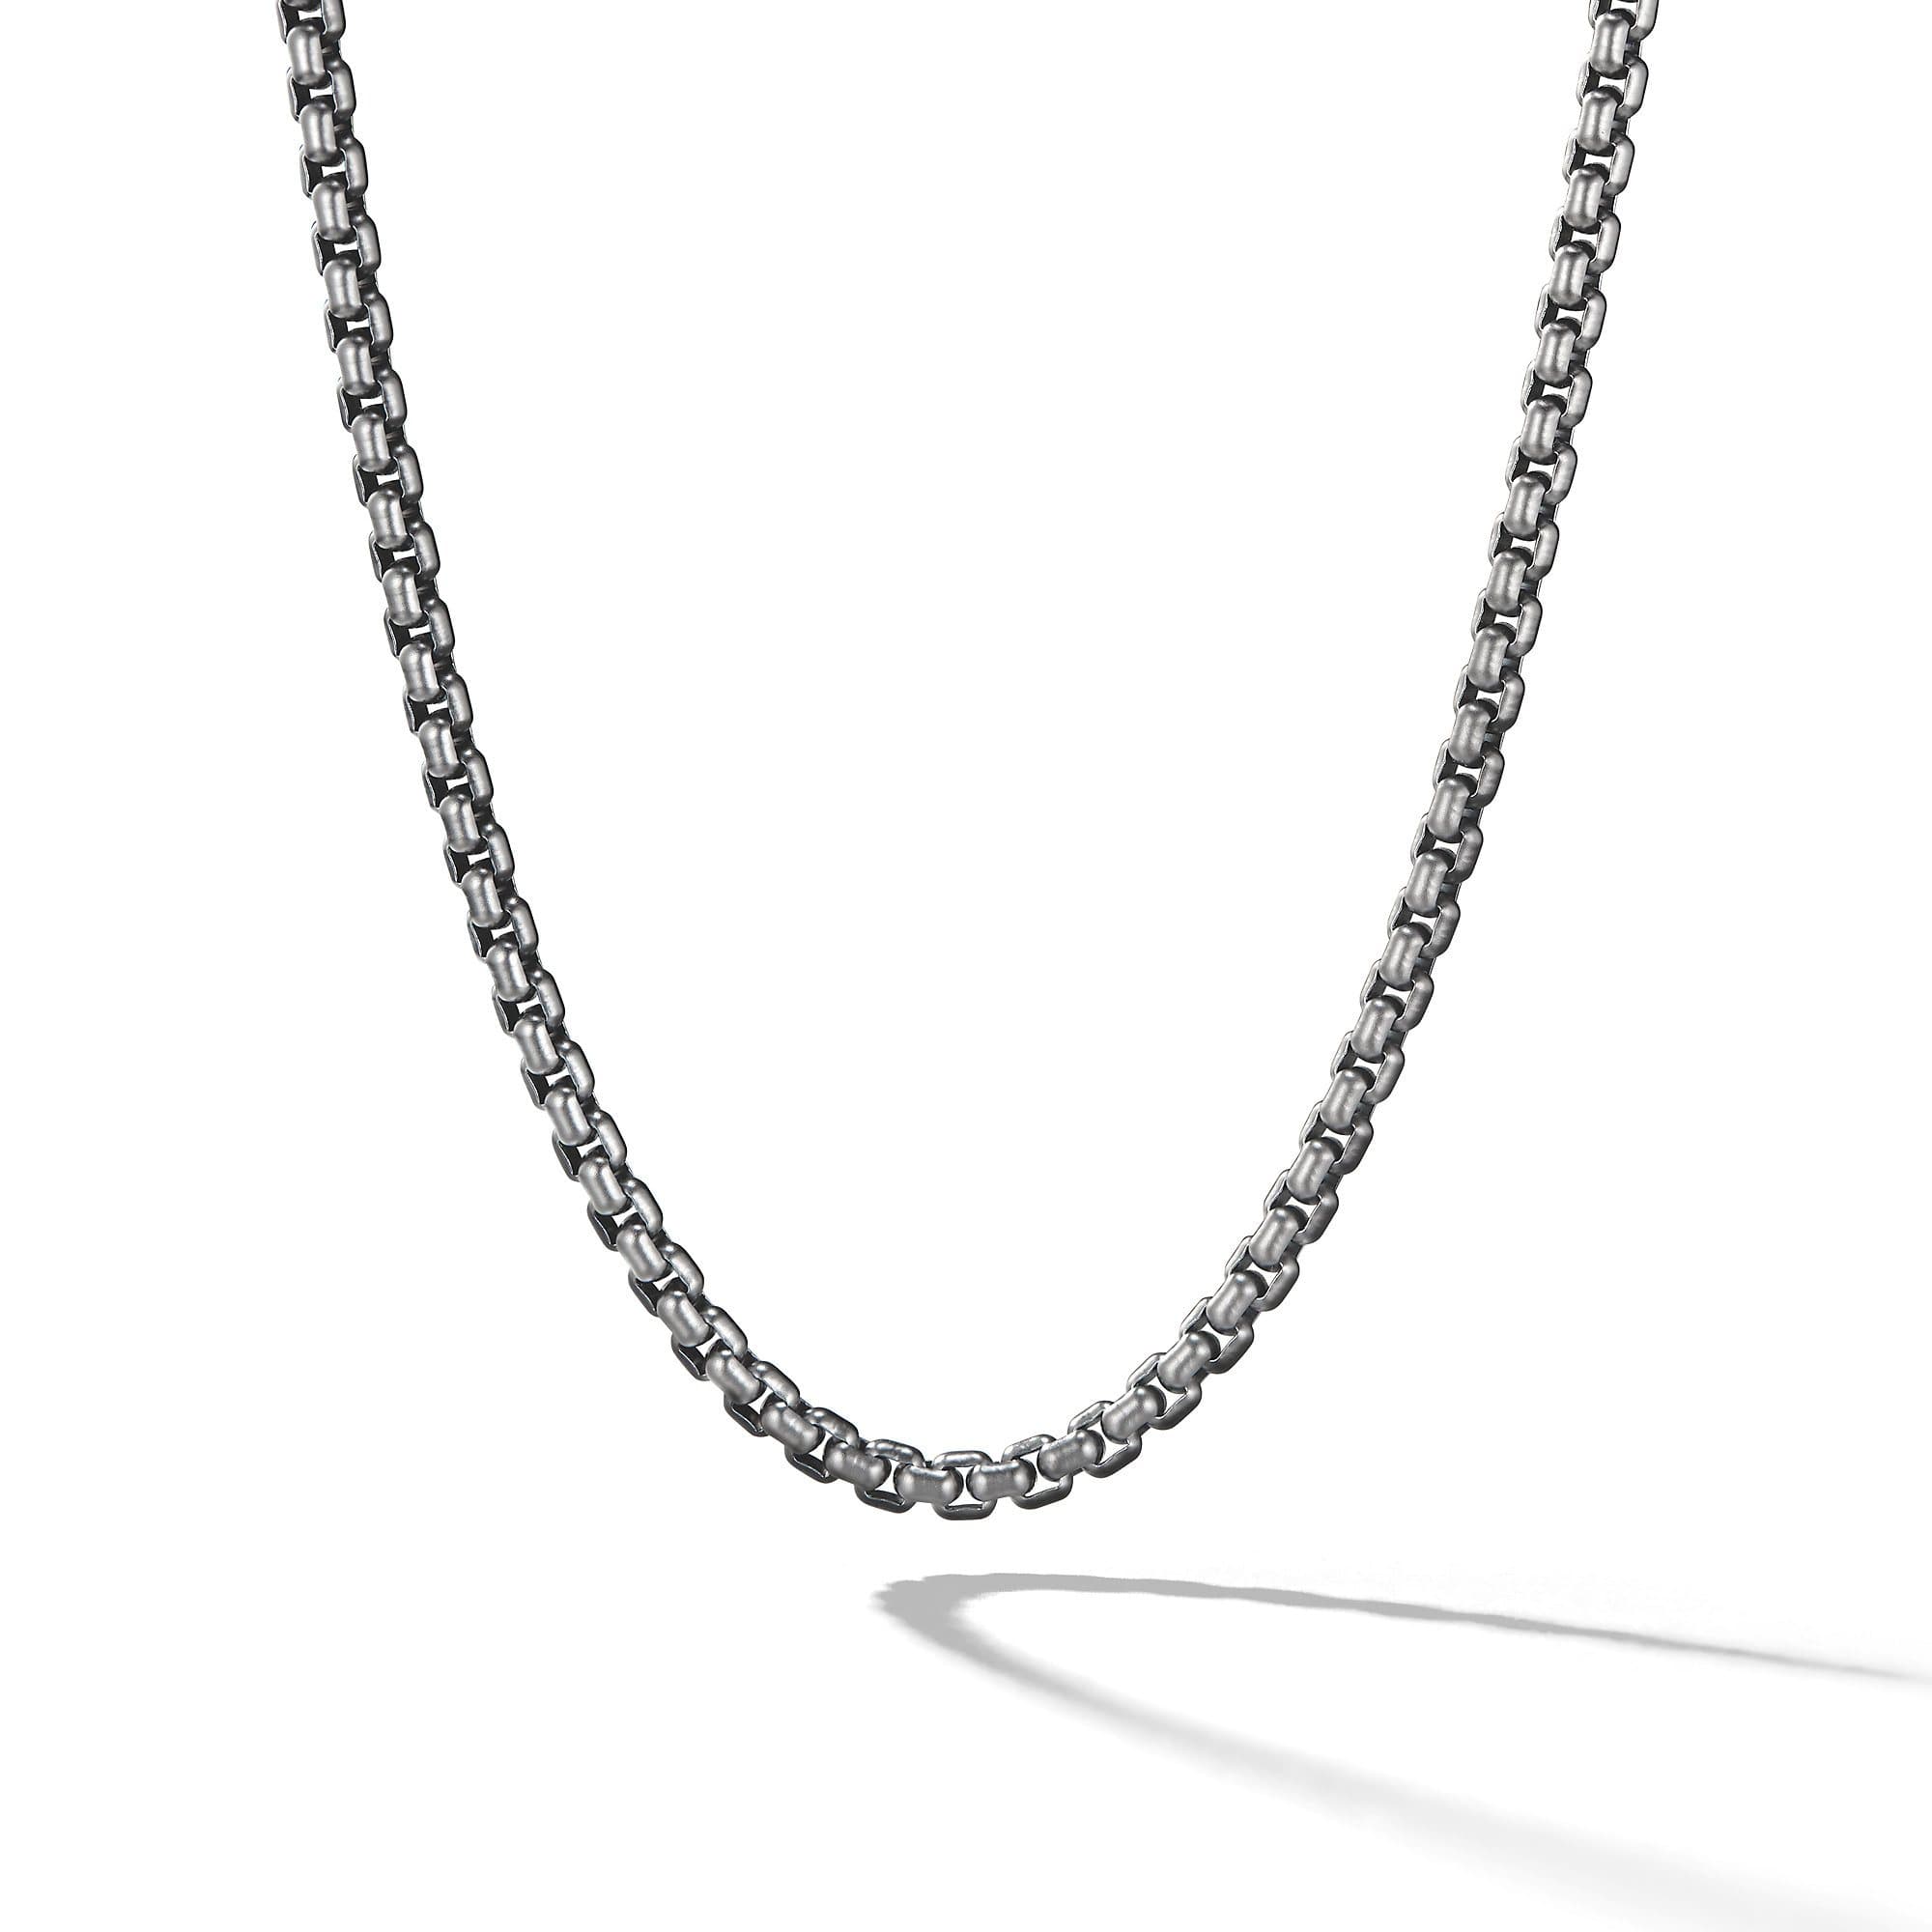 David Yurman Men's 4mm Black Stainless Steel Box Chain Necklace, 22 Inches